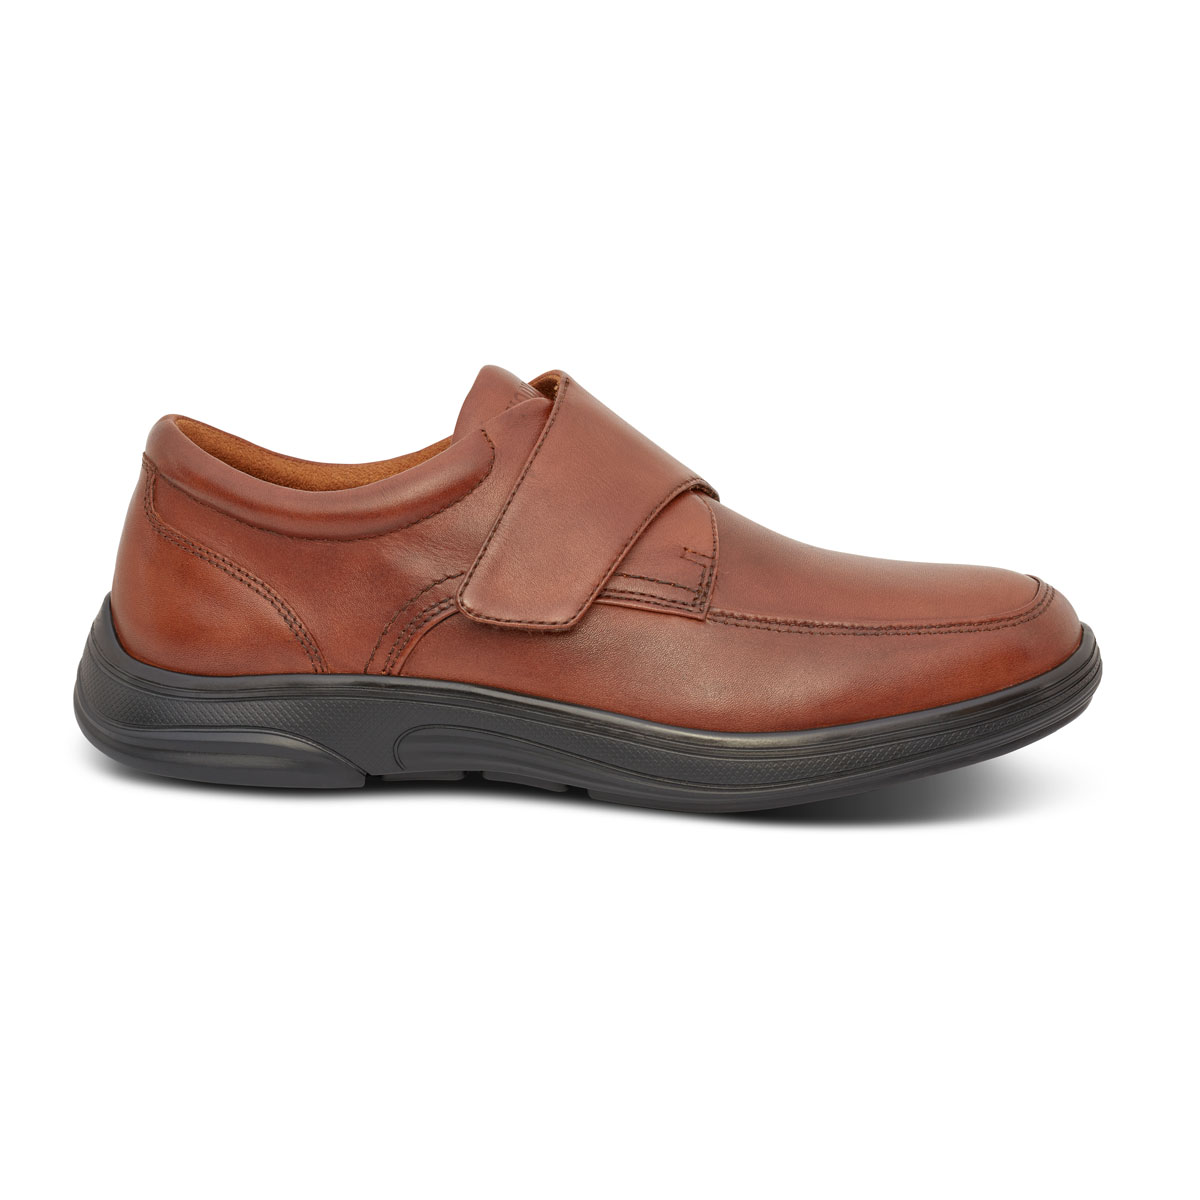 mens casual oxford shoes brown